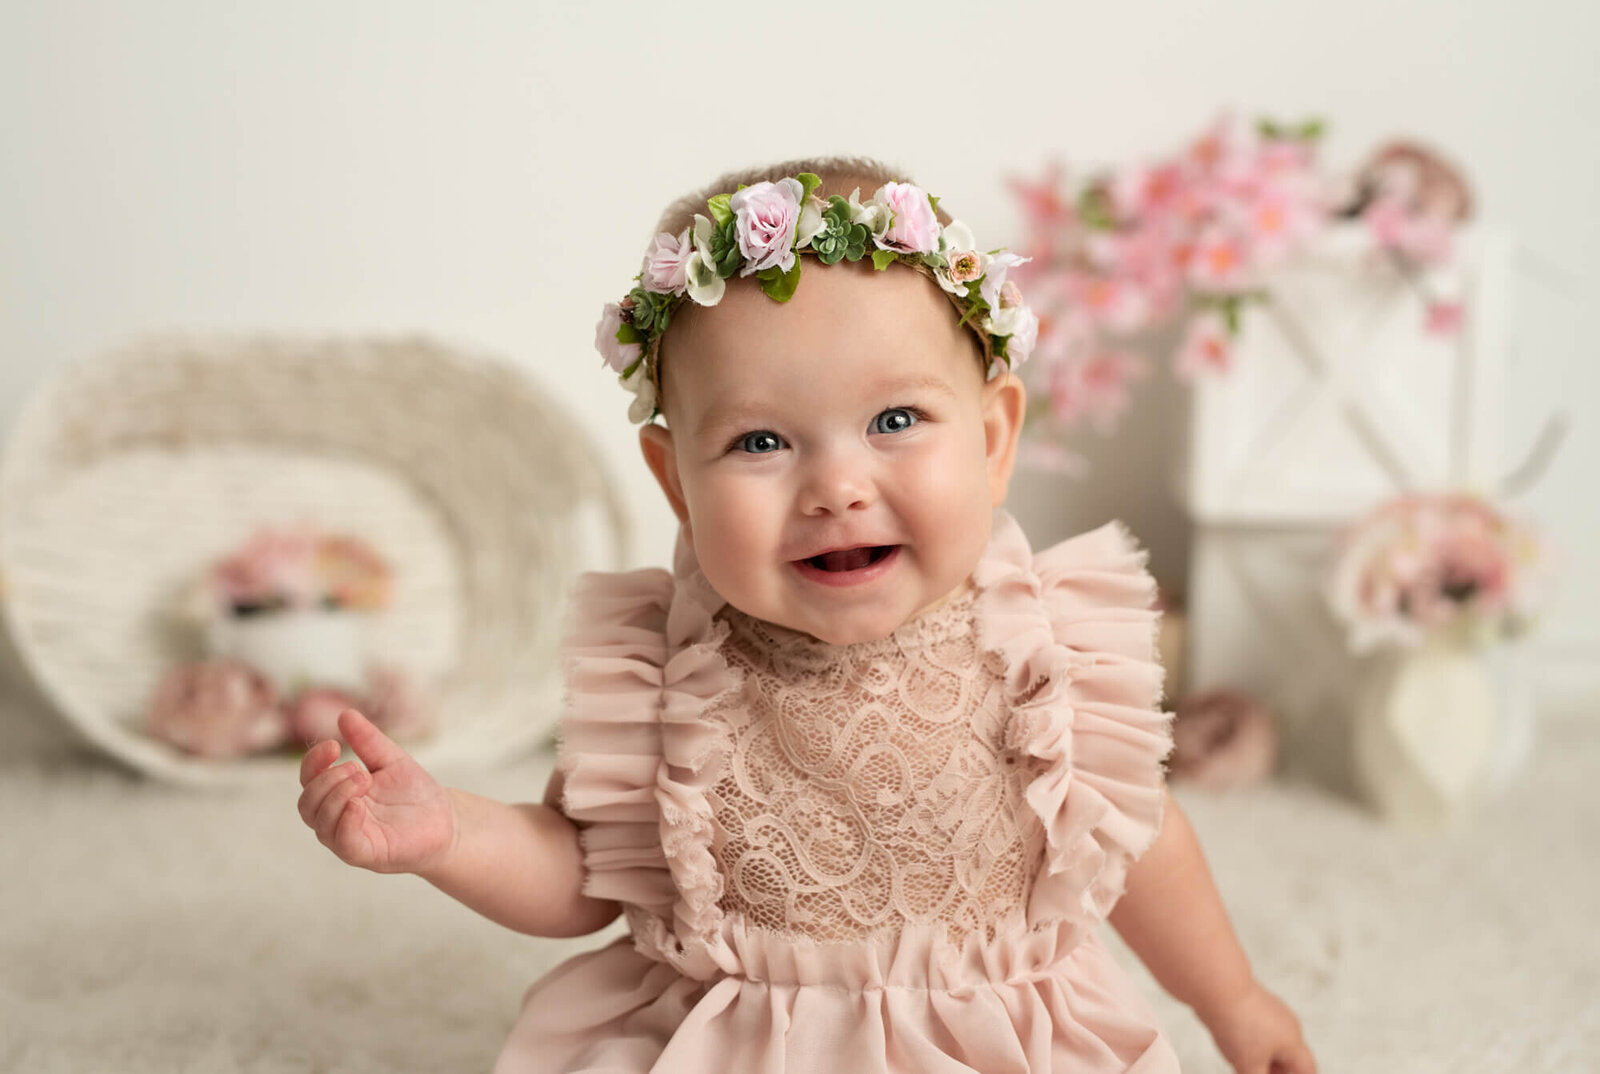 Baby girl with pink romper